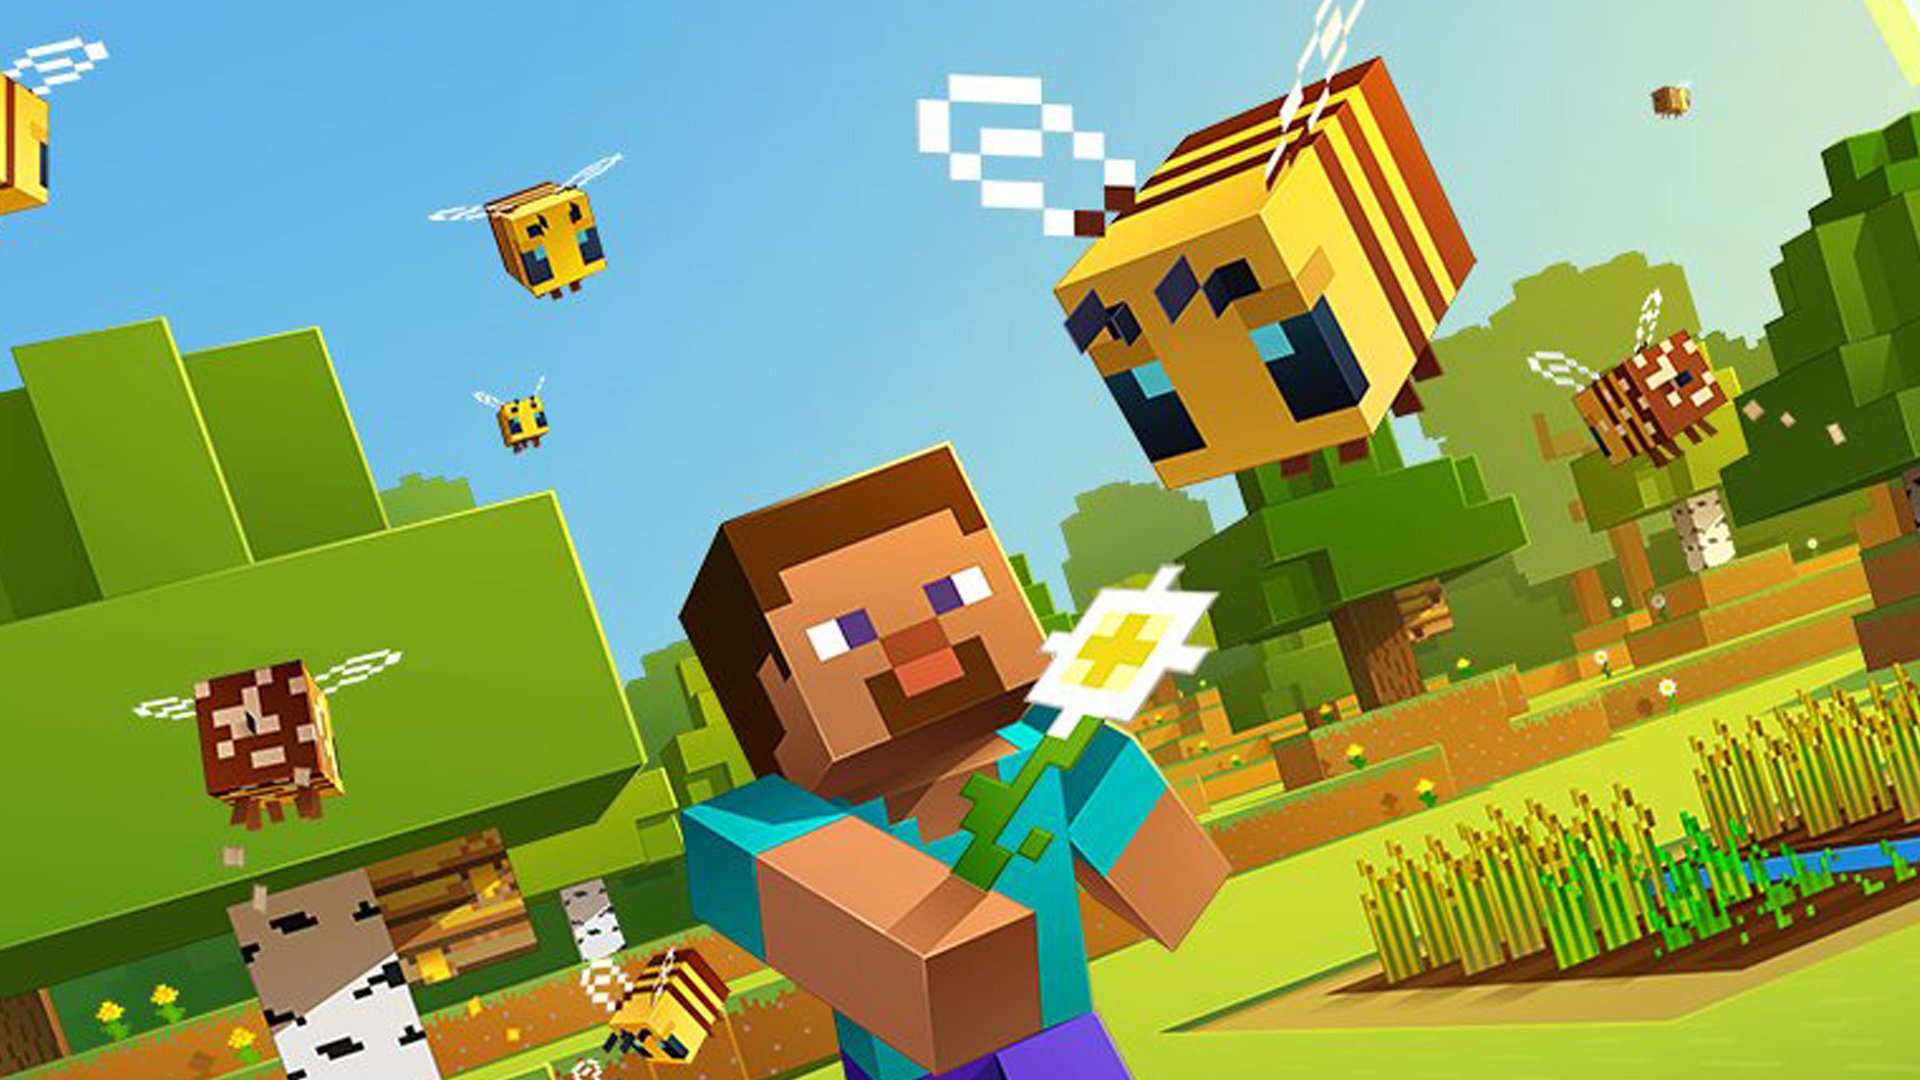 Minecraft in the Classroom: The Power of Game-Based Learning